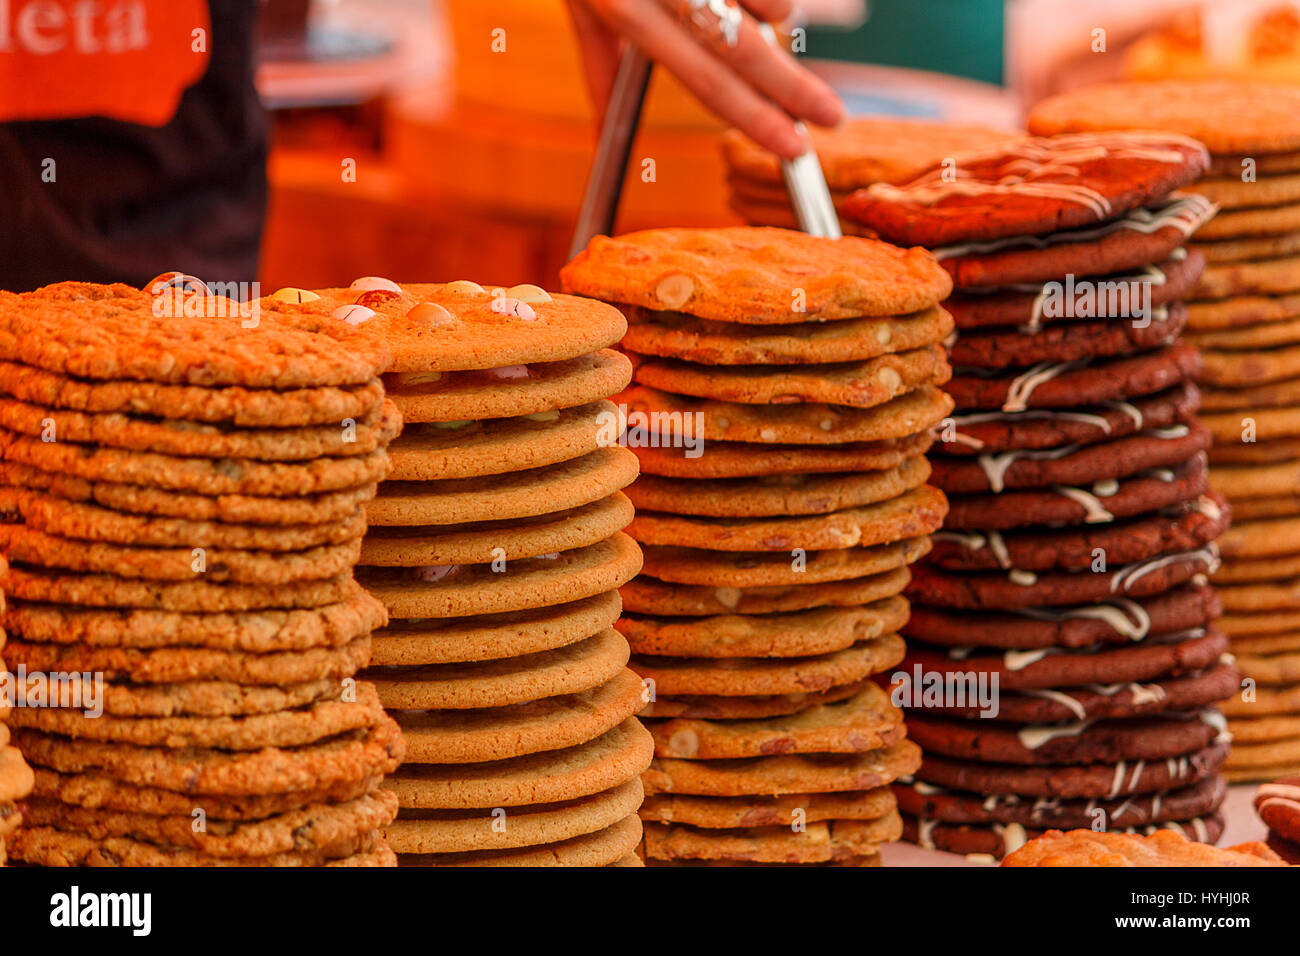 cookies being sold on a market stall Stock Photo